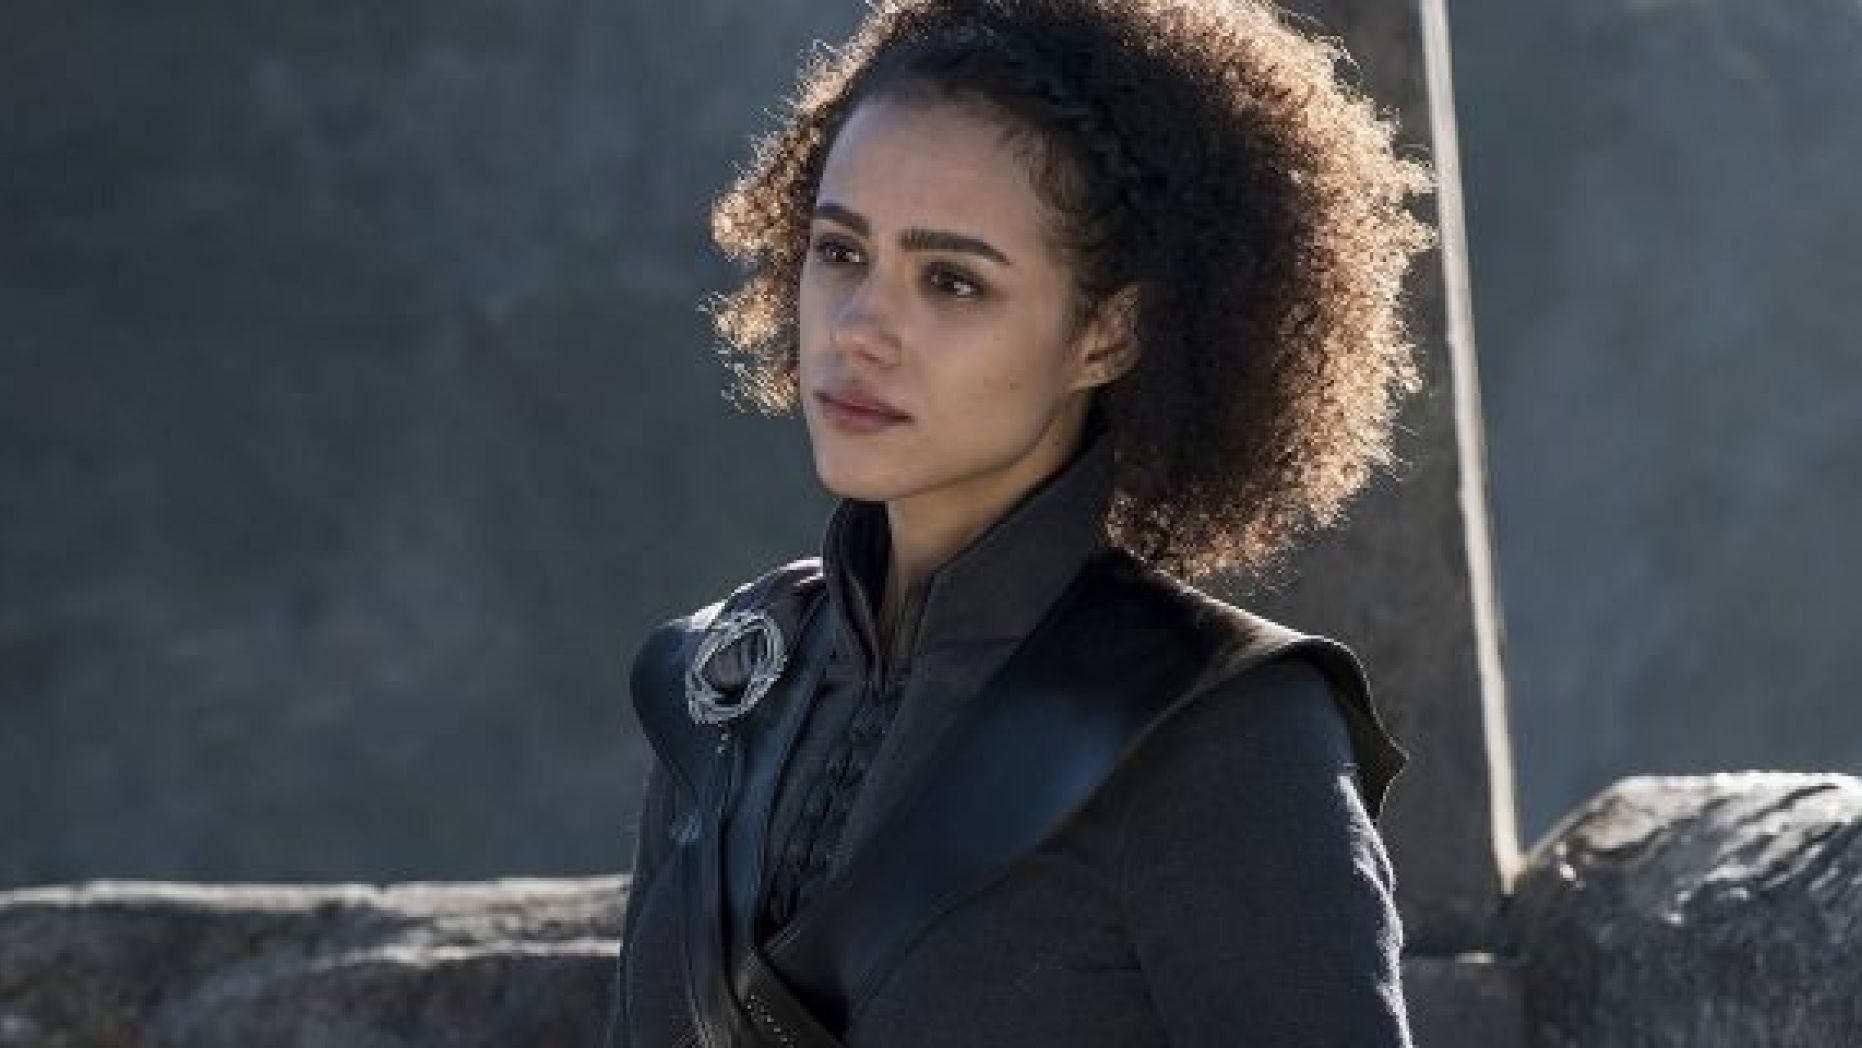 'Game of Thrones' actress Nathalie Emmanuel teased a mind-blowing finale to the show.